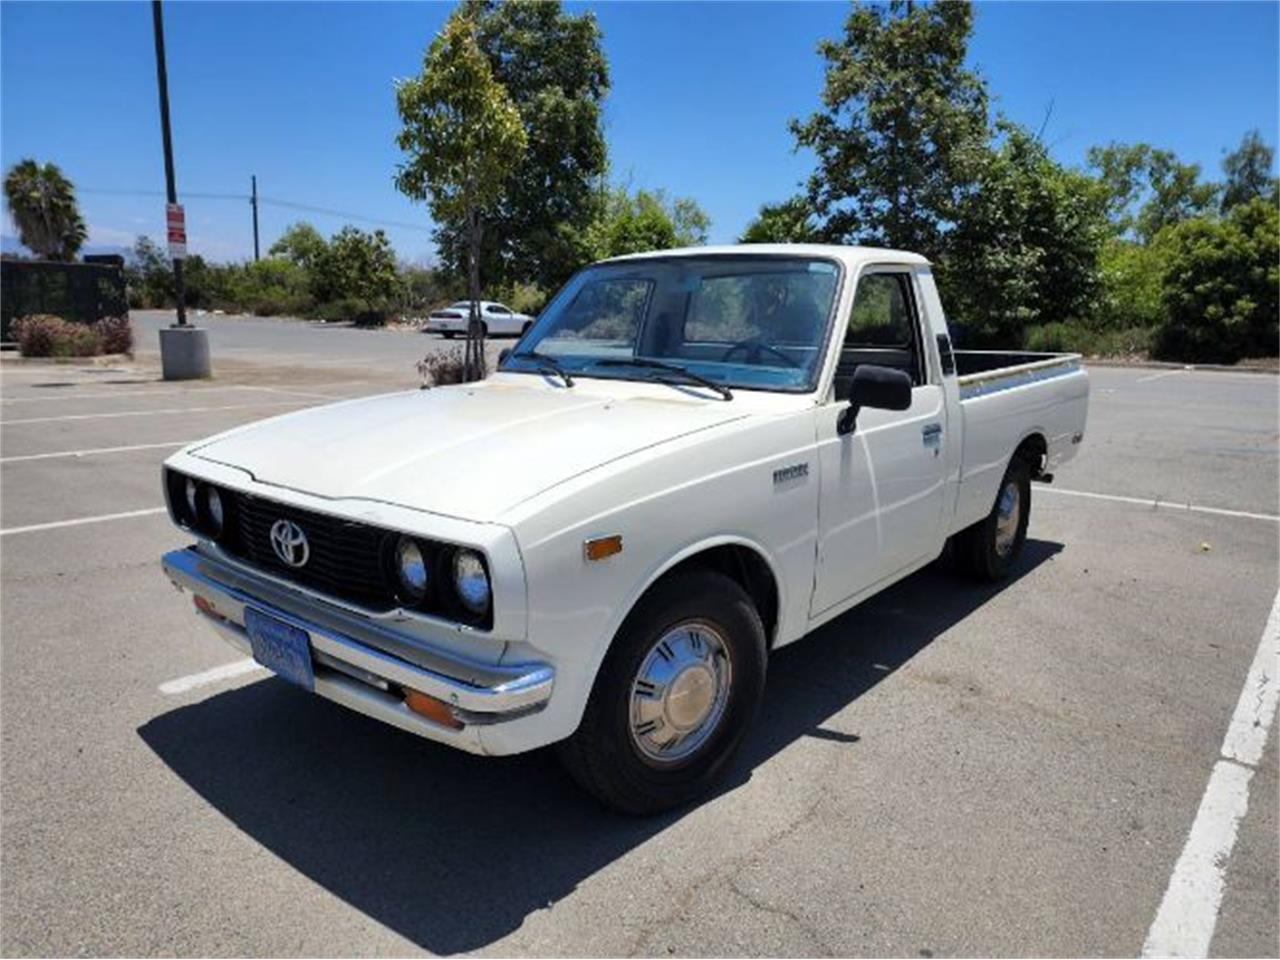 for sale 1976 toyota pickup in cadillac, michigan for sale in cadillac, mi